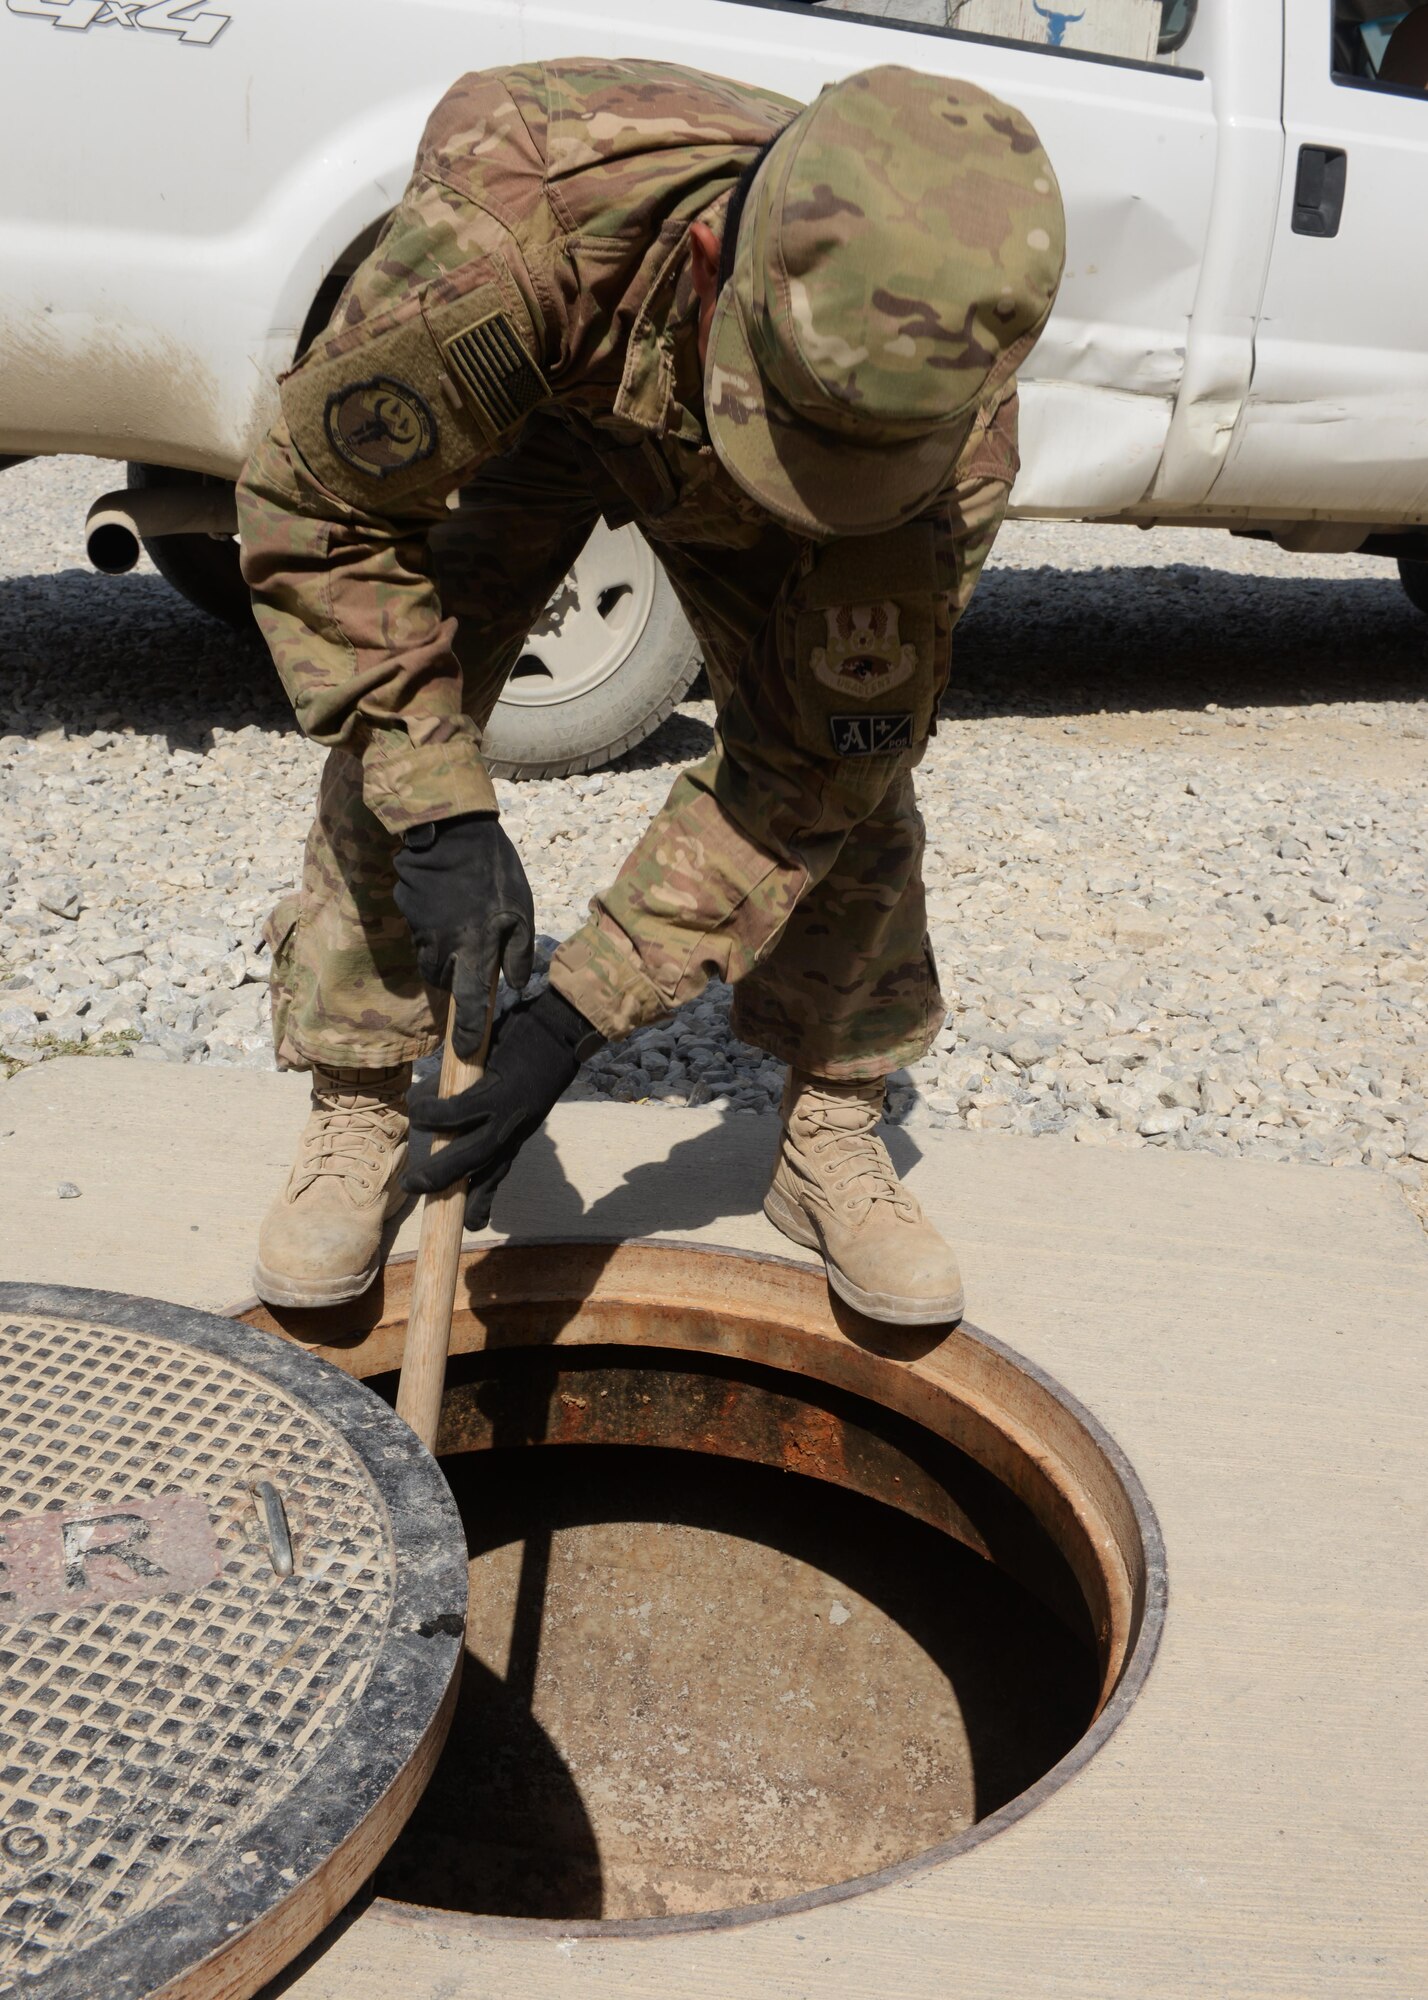 U.S. Air Force Reigel Daylo, 455th Expeditionary Civil Engineer Squadron water and fuel systems maintenance journeyman, checks a water system for debris Aug. 27, 2015, at Bagram Airfield, Afghanistan. Daylo is one of three Airmen responsible for maintaining the fuel line on the airfield as well as quality of life of some living quarters on base and a few facilities that are not yet contracted. (U.S. Air Force photo by Senior Airman Cierra Presentado/Released)